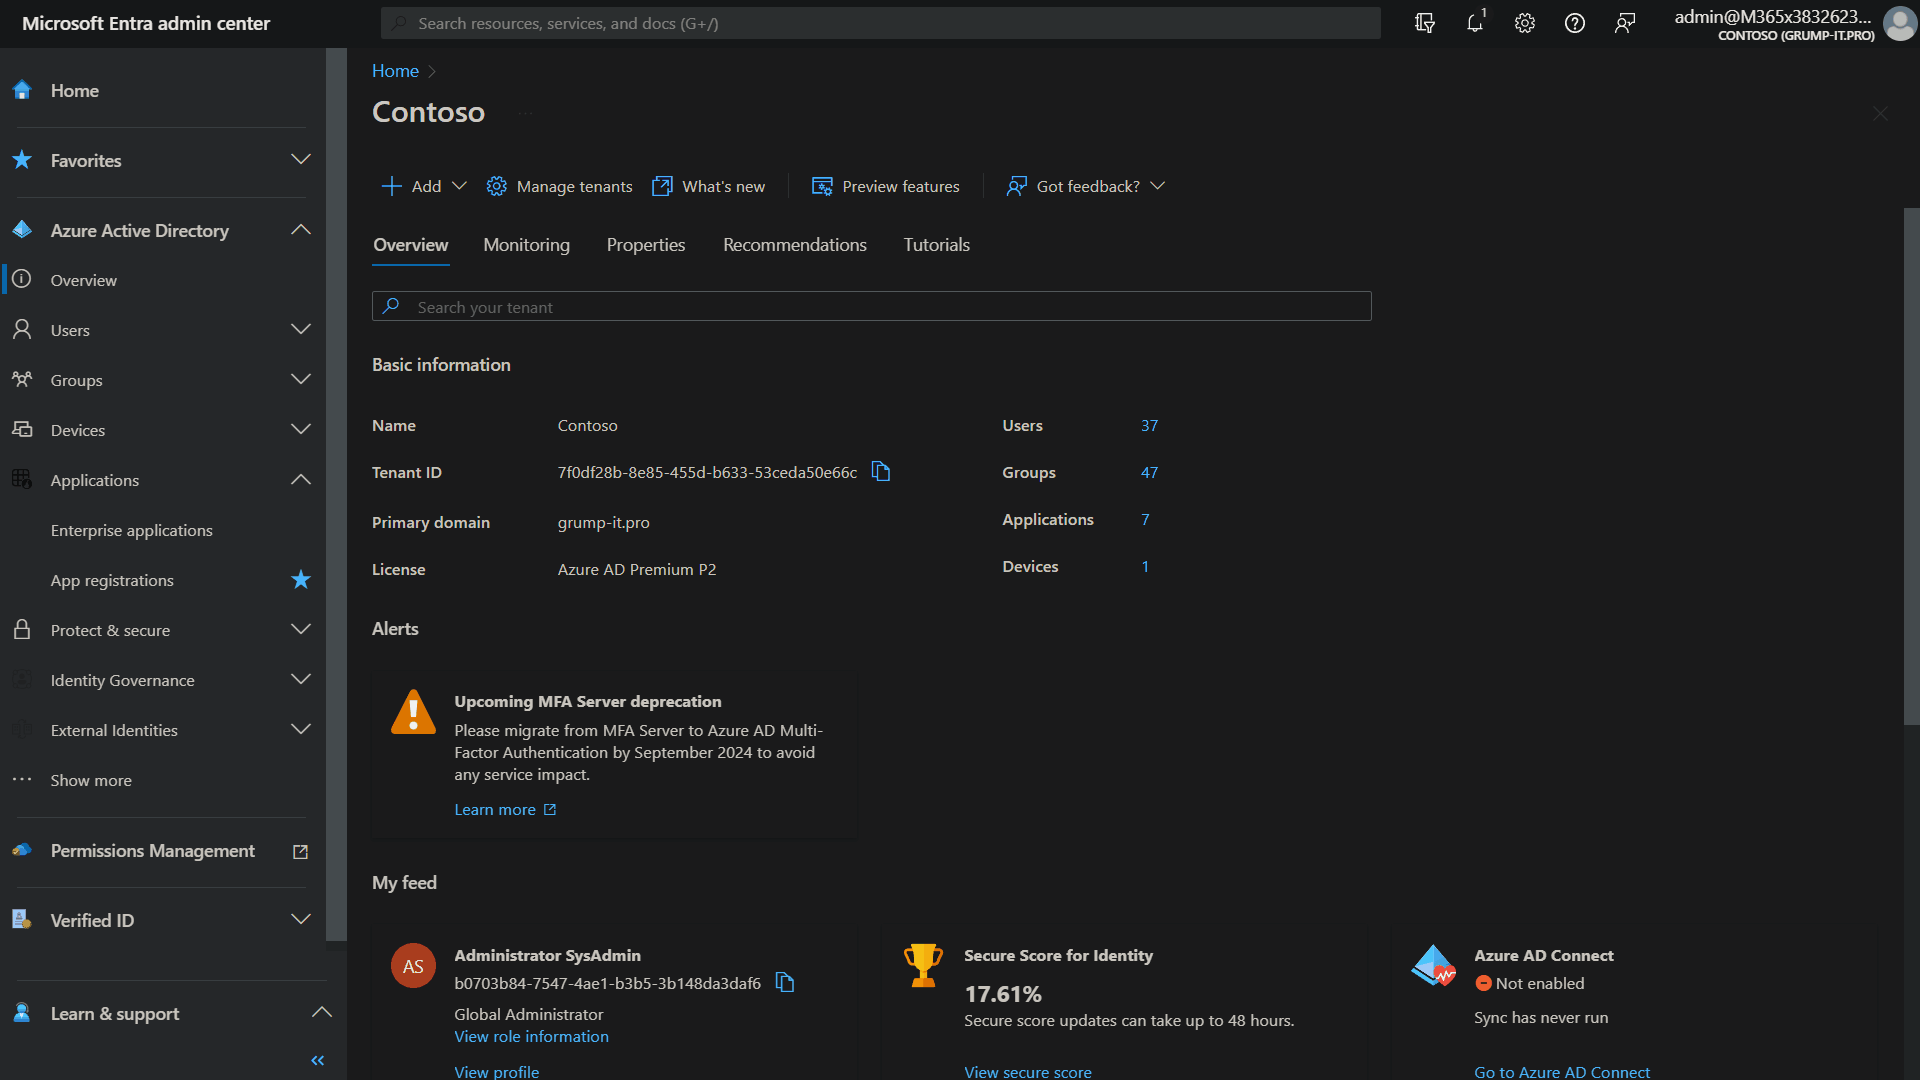 An animated GIF going through the steps of creating an App Registration in Azure AD to provide Read access to Microsoft Graph API data